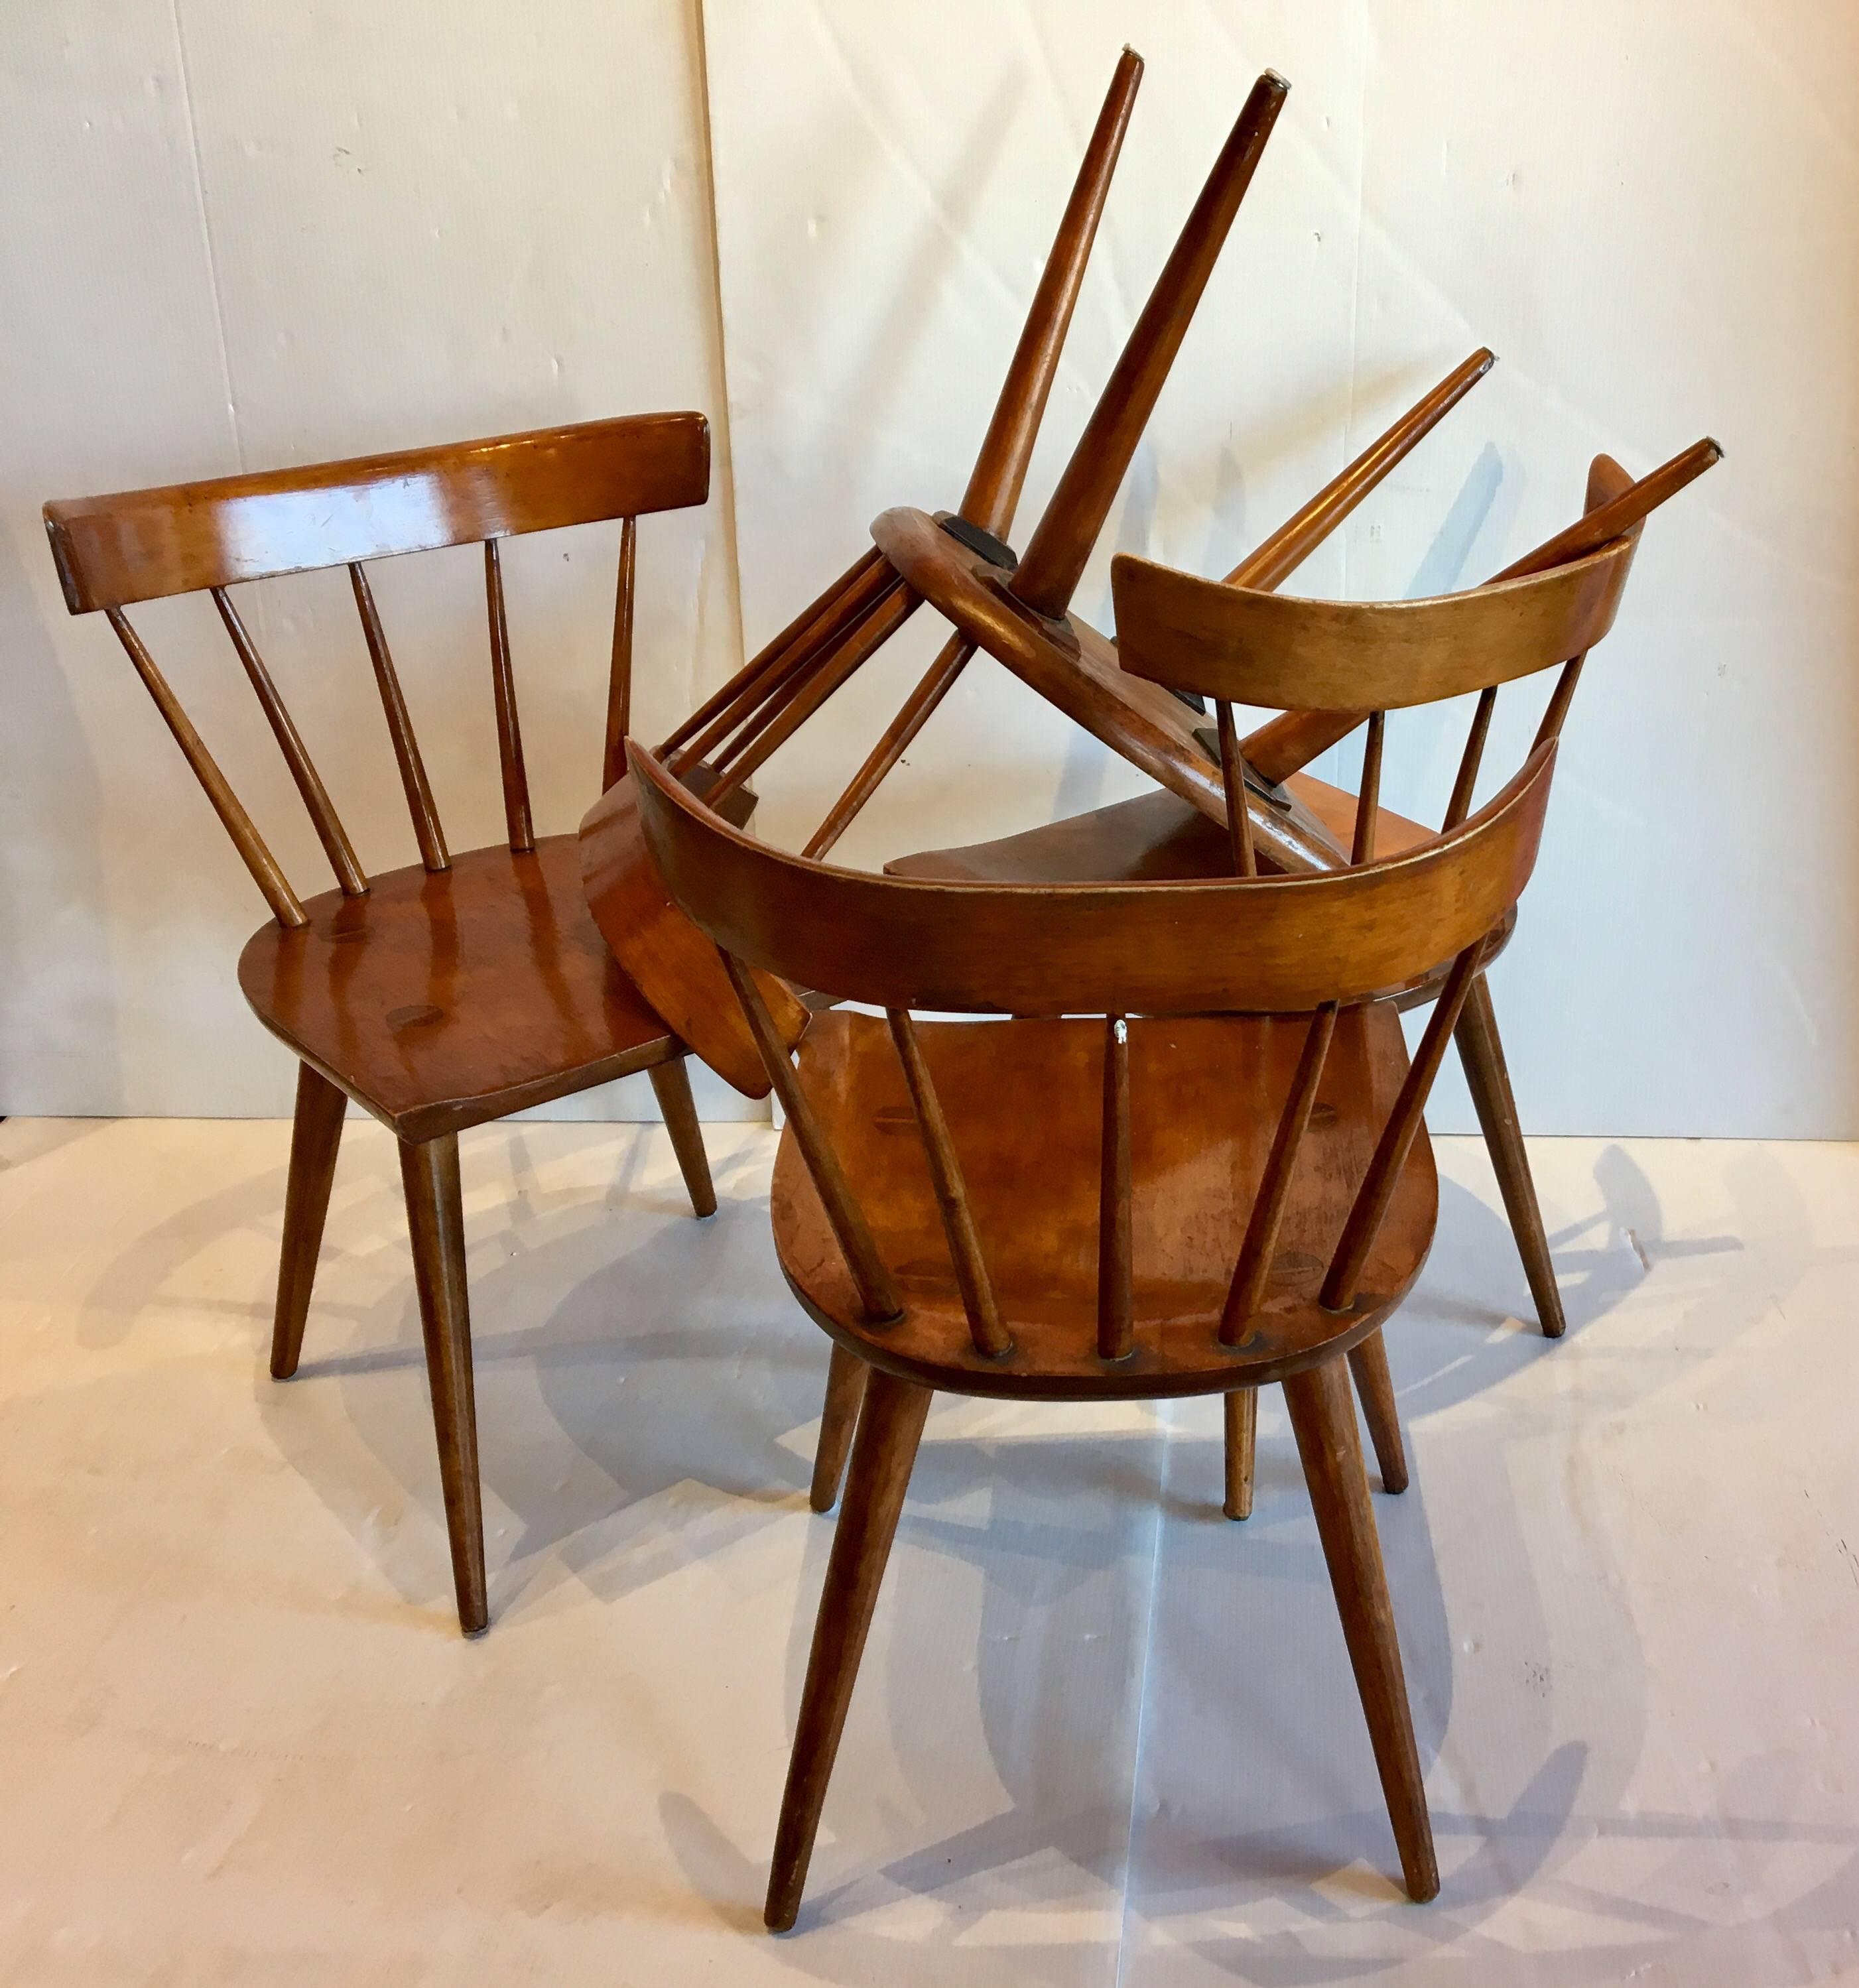 Nice set of four solid maple chairs by Paul McCobb in its original finish solid and sturdy, the chairs have patination some chips on the finish and light dings on the wood, they look great on this rustic finish.